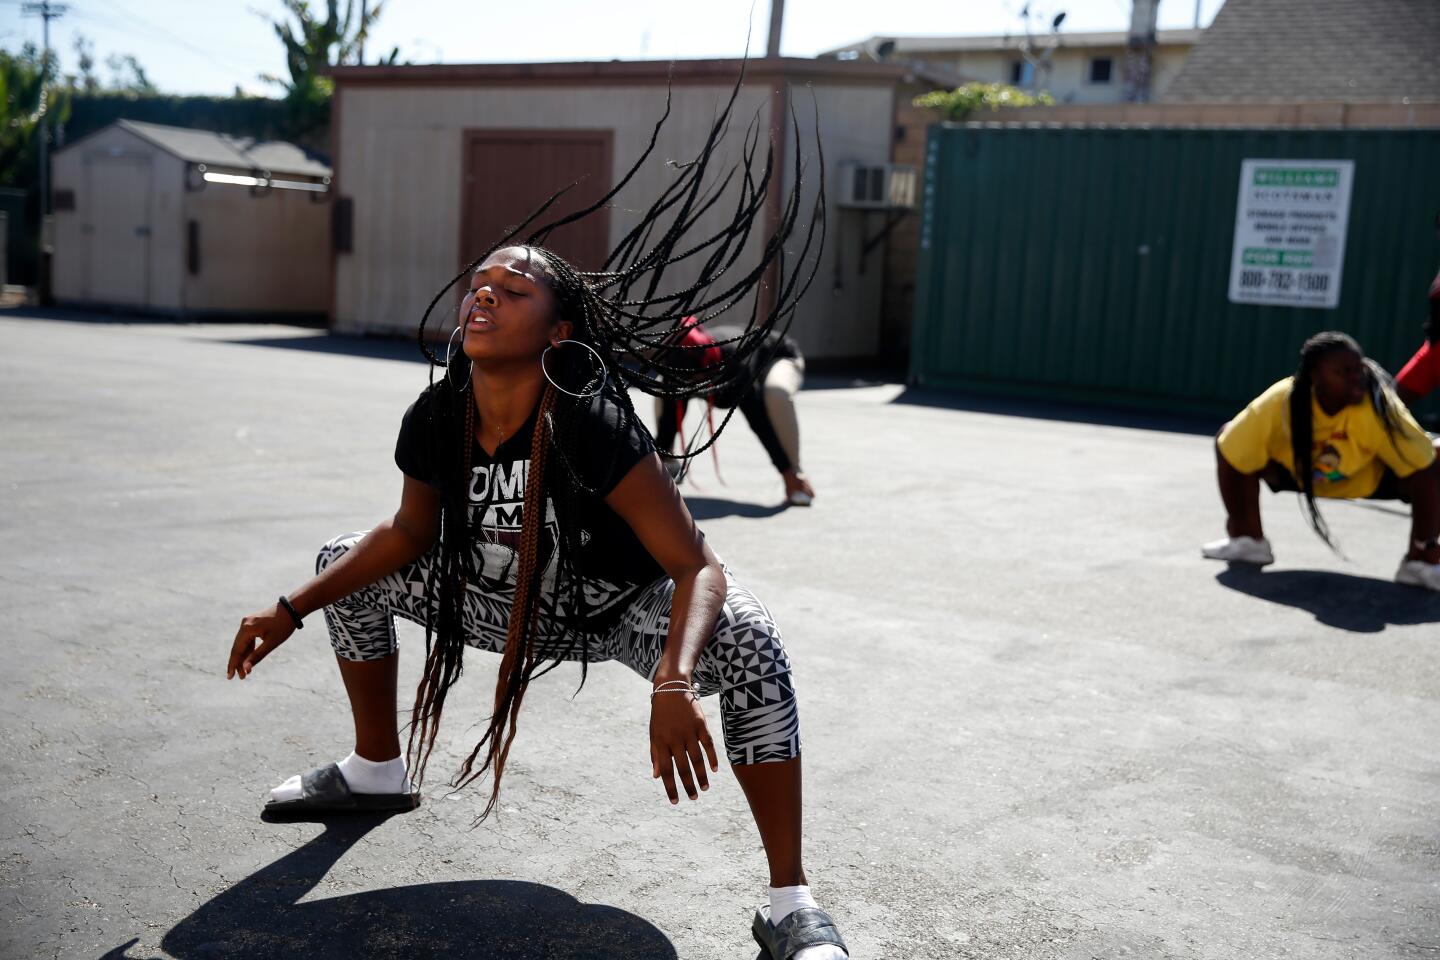 LOS ANGELES, CA-AUGUST 26, 2019: Kamryn Johnson dances with classmates after school on August 26, 2019 in Los Angeles, California. She is a student at ICEF View Park Prep Charter High School, across the street from the Marathon store where Nipsey Hussle was shot and killed earlier this year. (Photo By Dania Maxwell / Los Angeles Times)